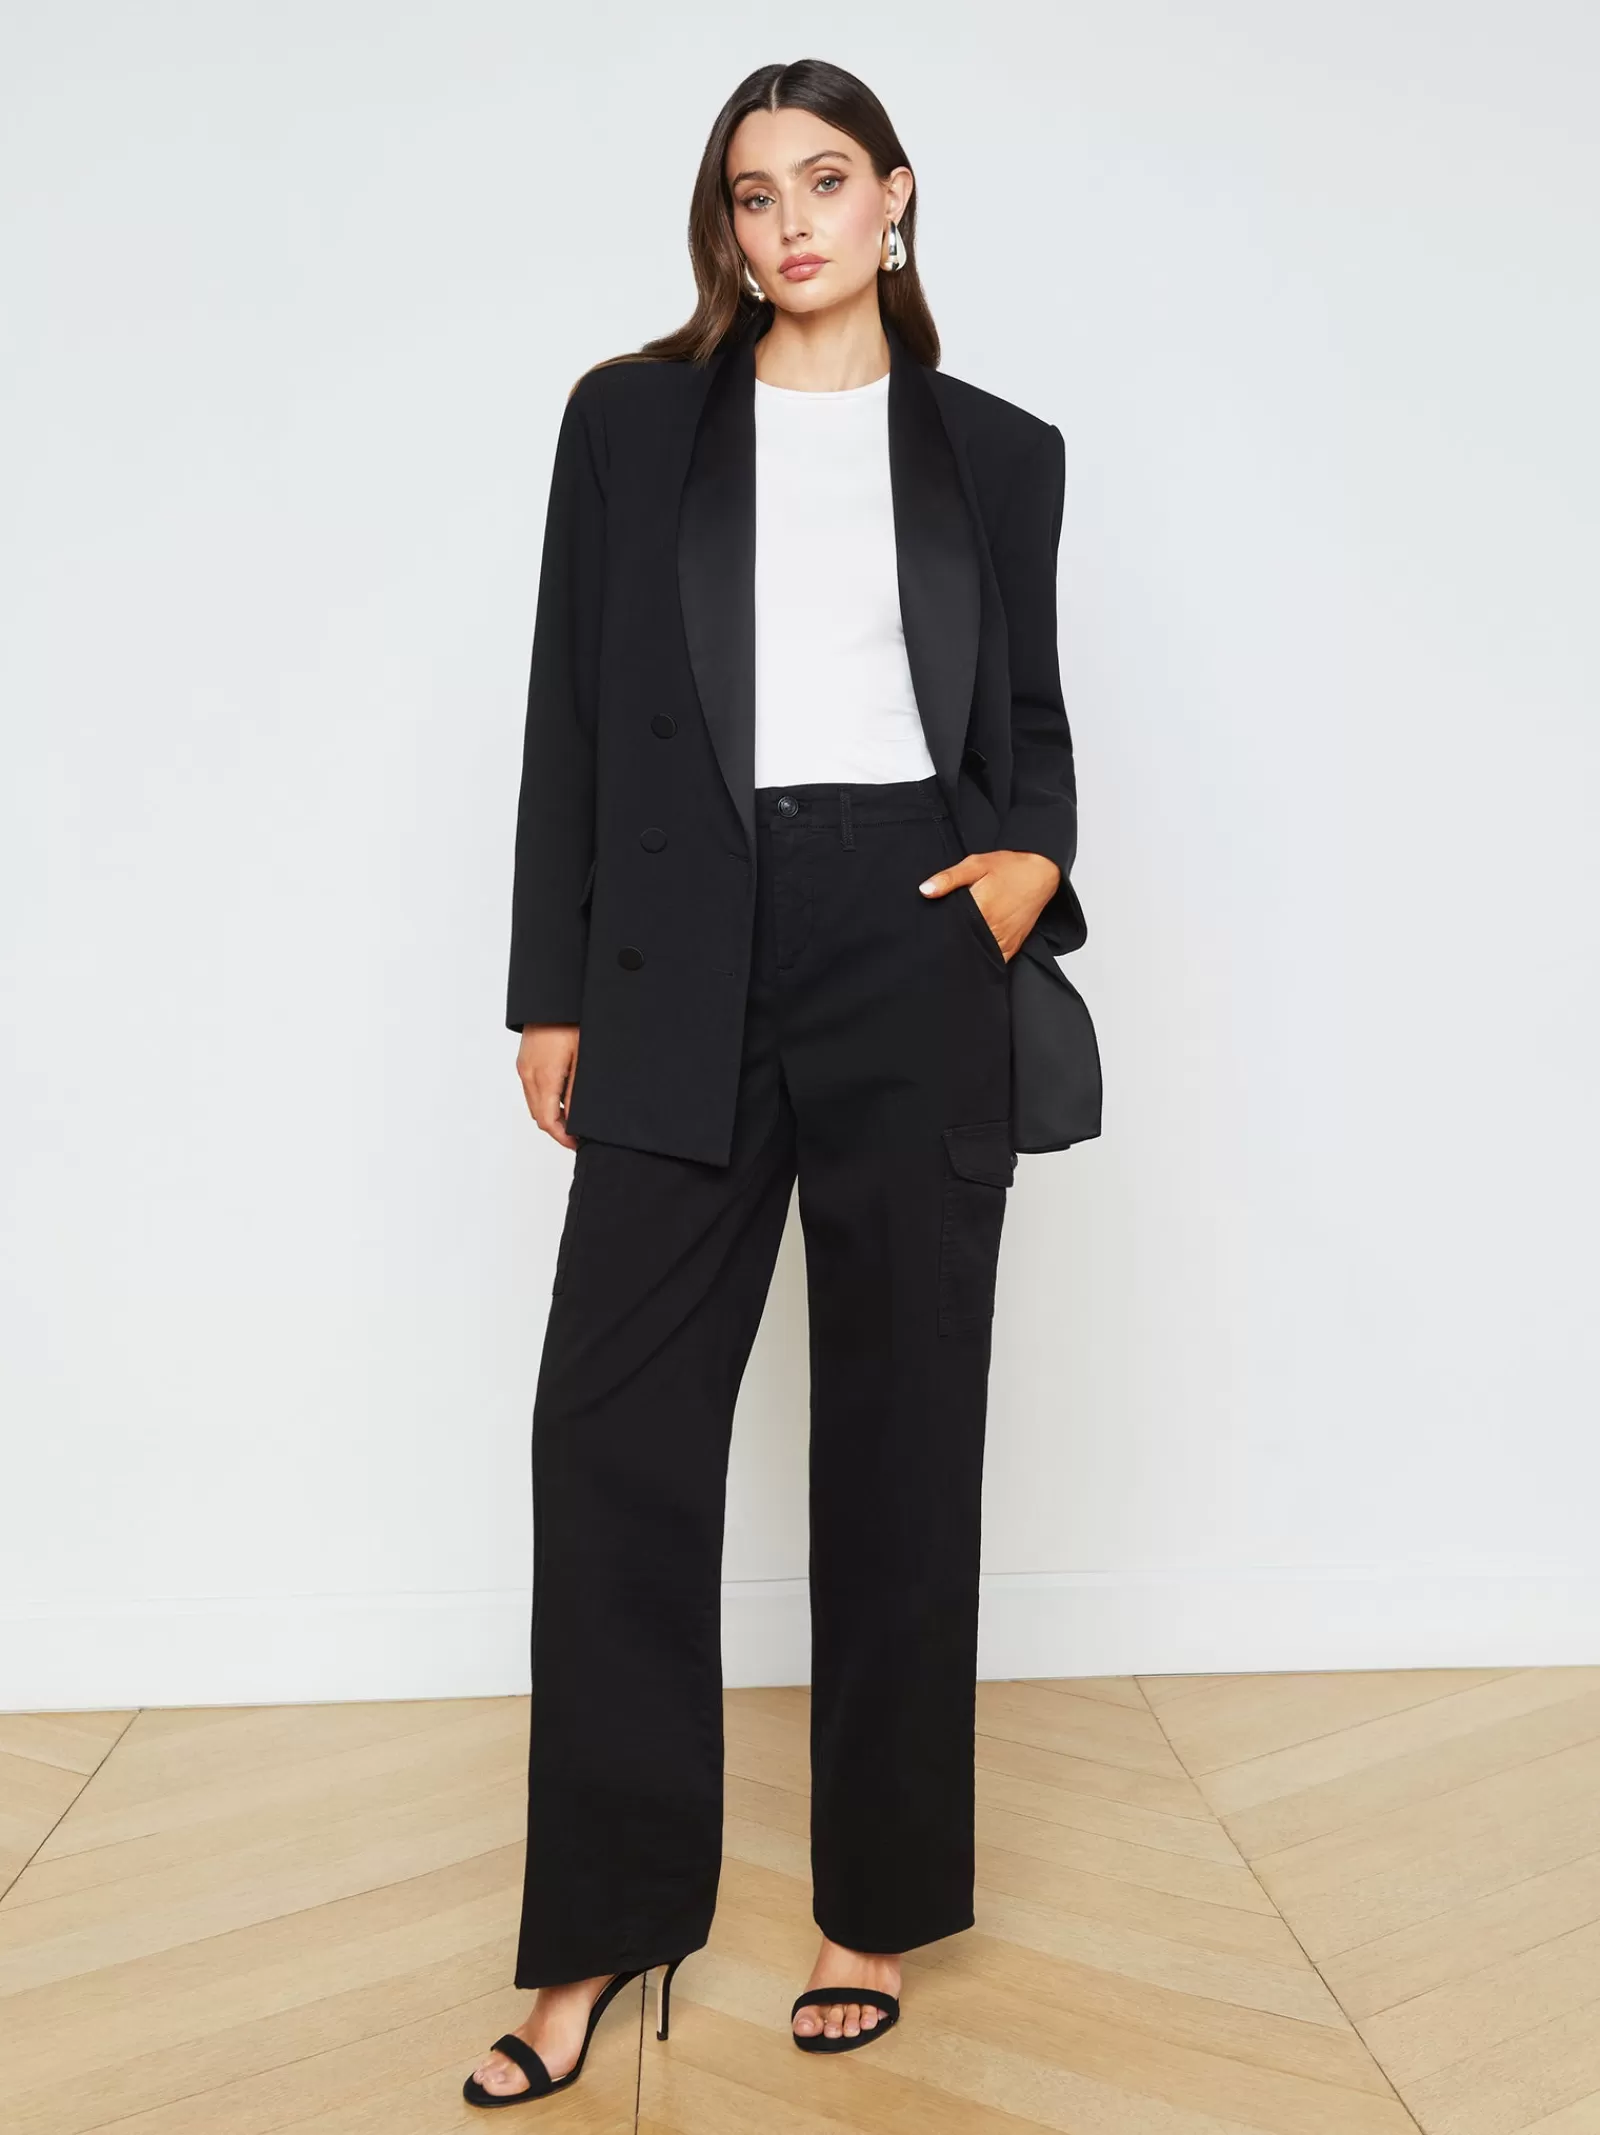 L'AGENCE Channing Trouser< All Things Black | Cargo Pants